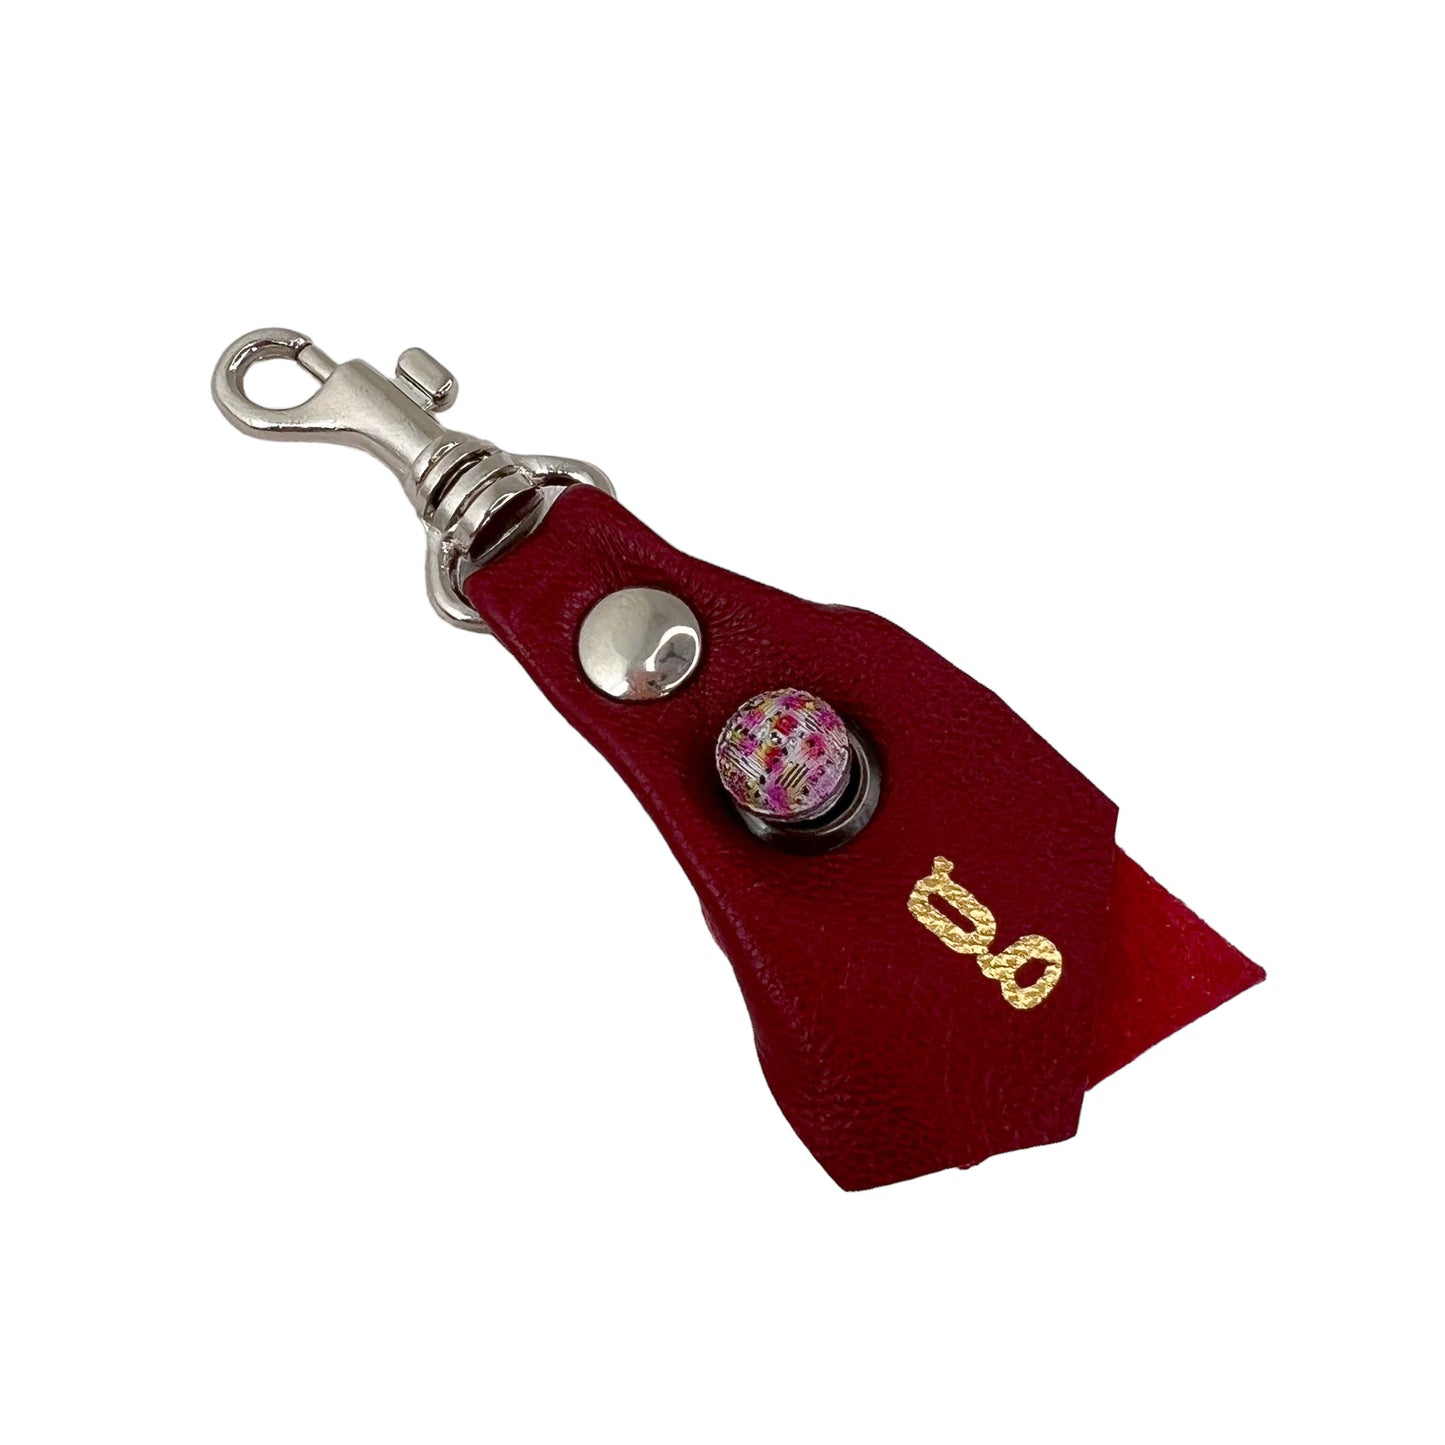 Zipper Fob Red Lamb Leather Spring Hook